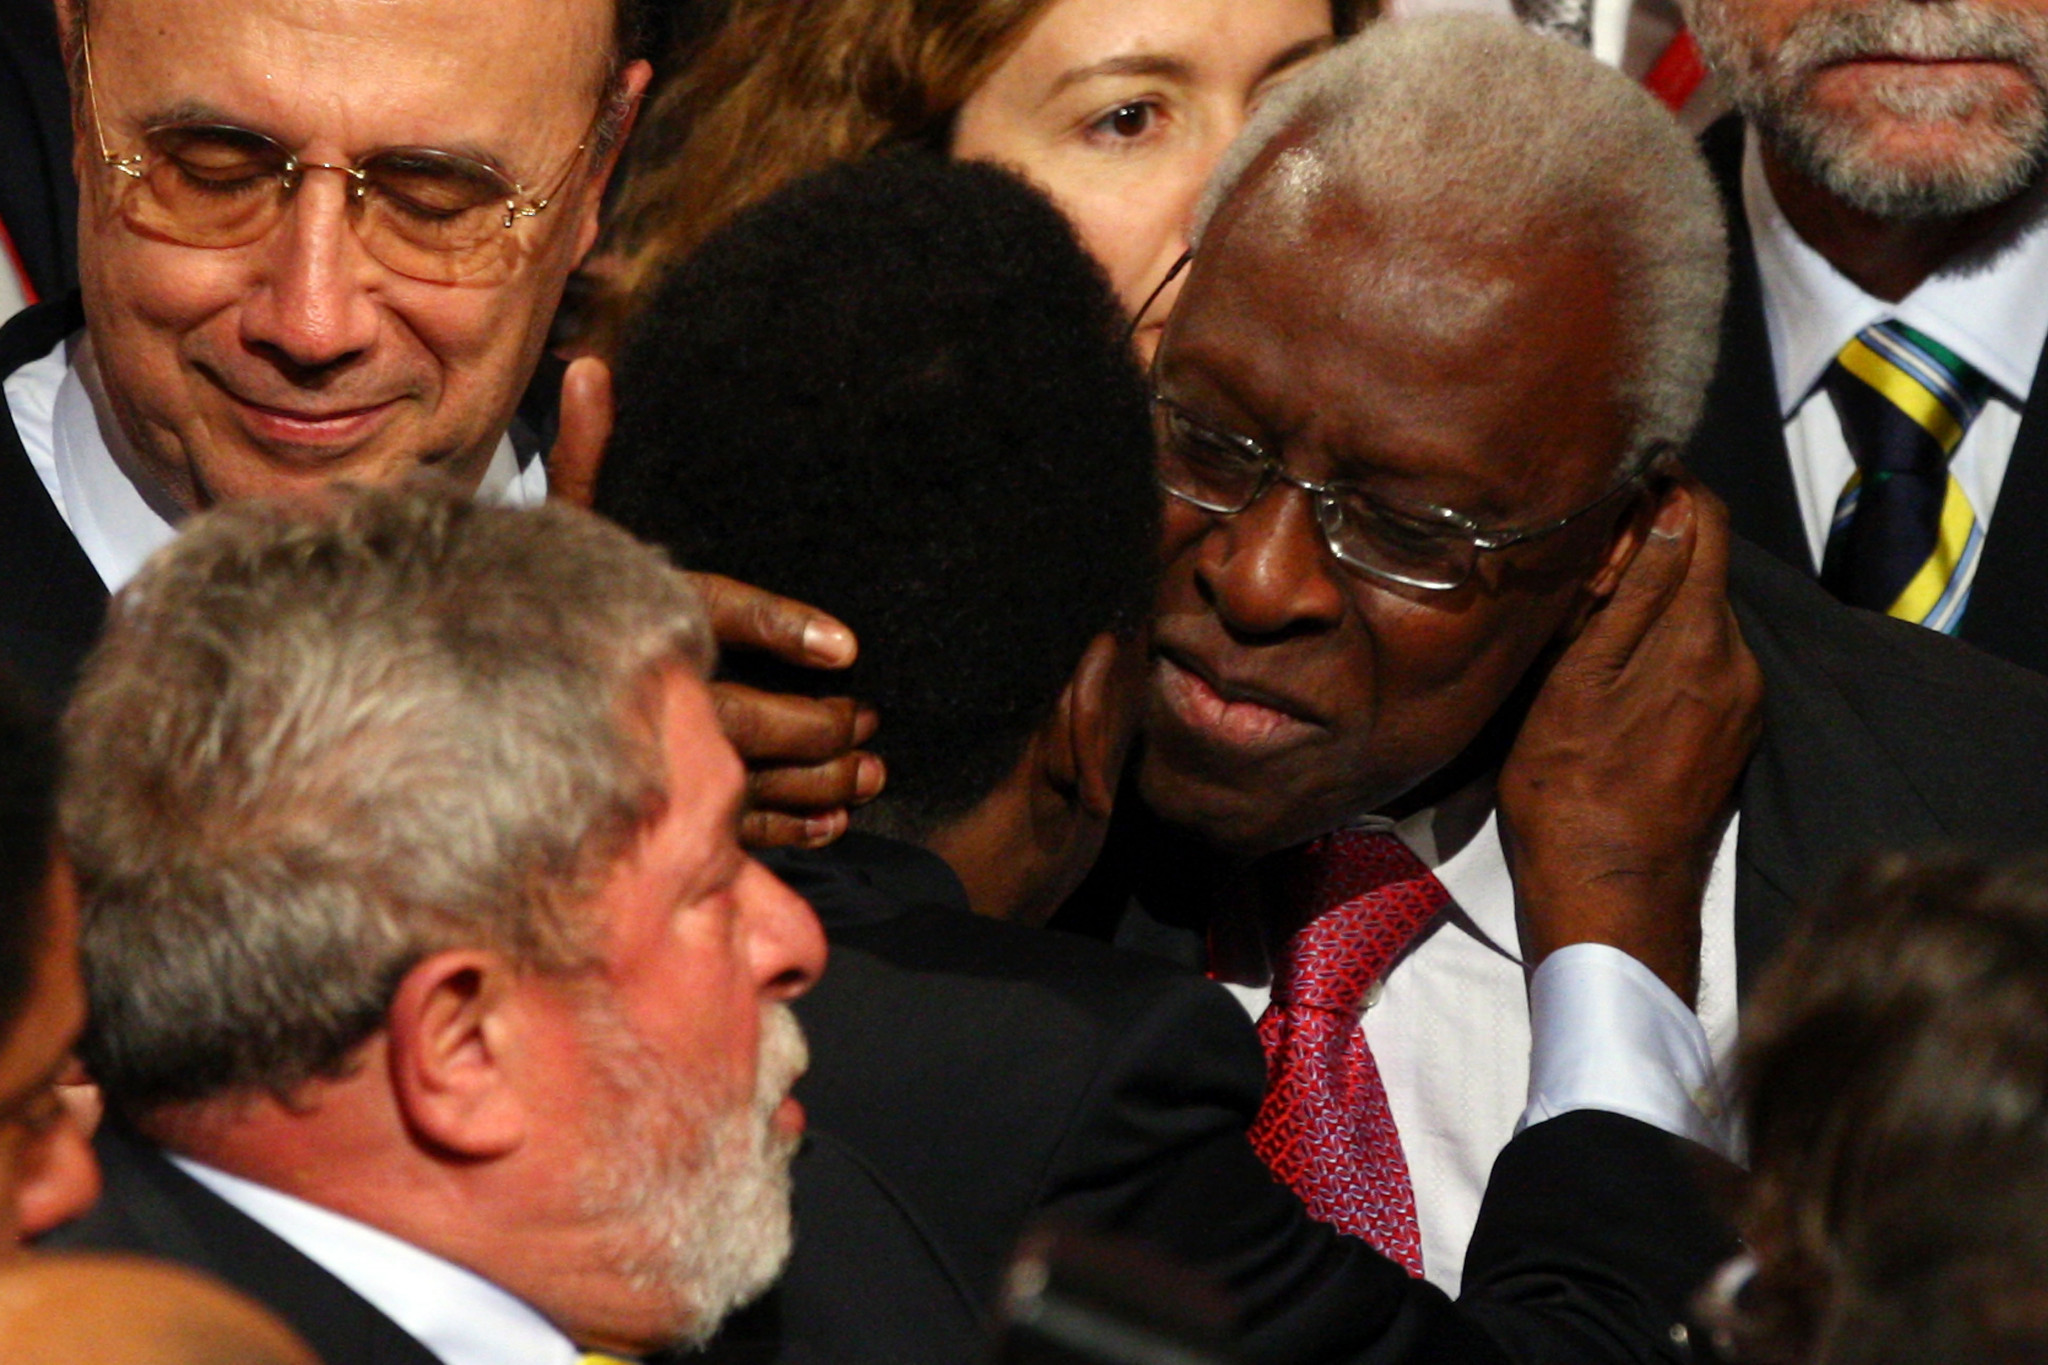 Lamine Diack, right, celebrated the awarding of the 2016 Olympics to Rio, for which has was accused of organising a corruption scheme to buy IOC votes ©Getty Images